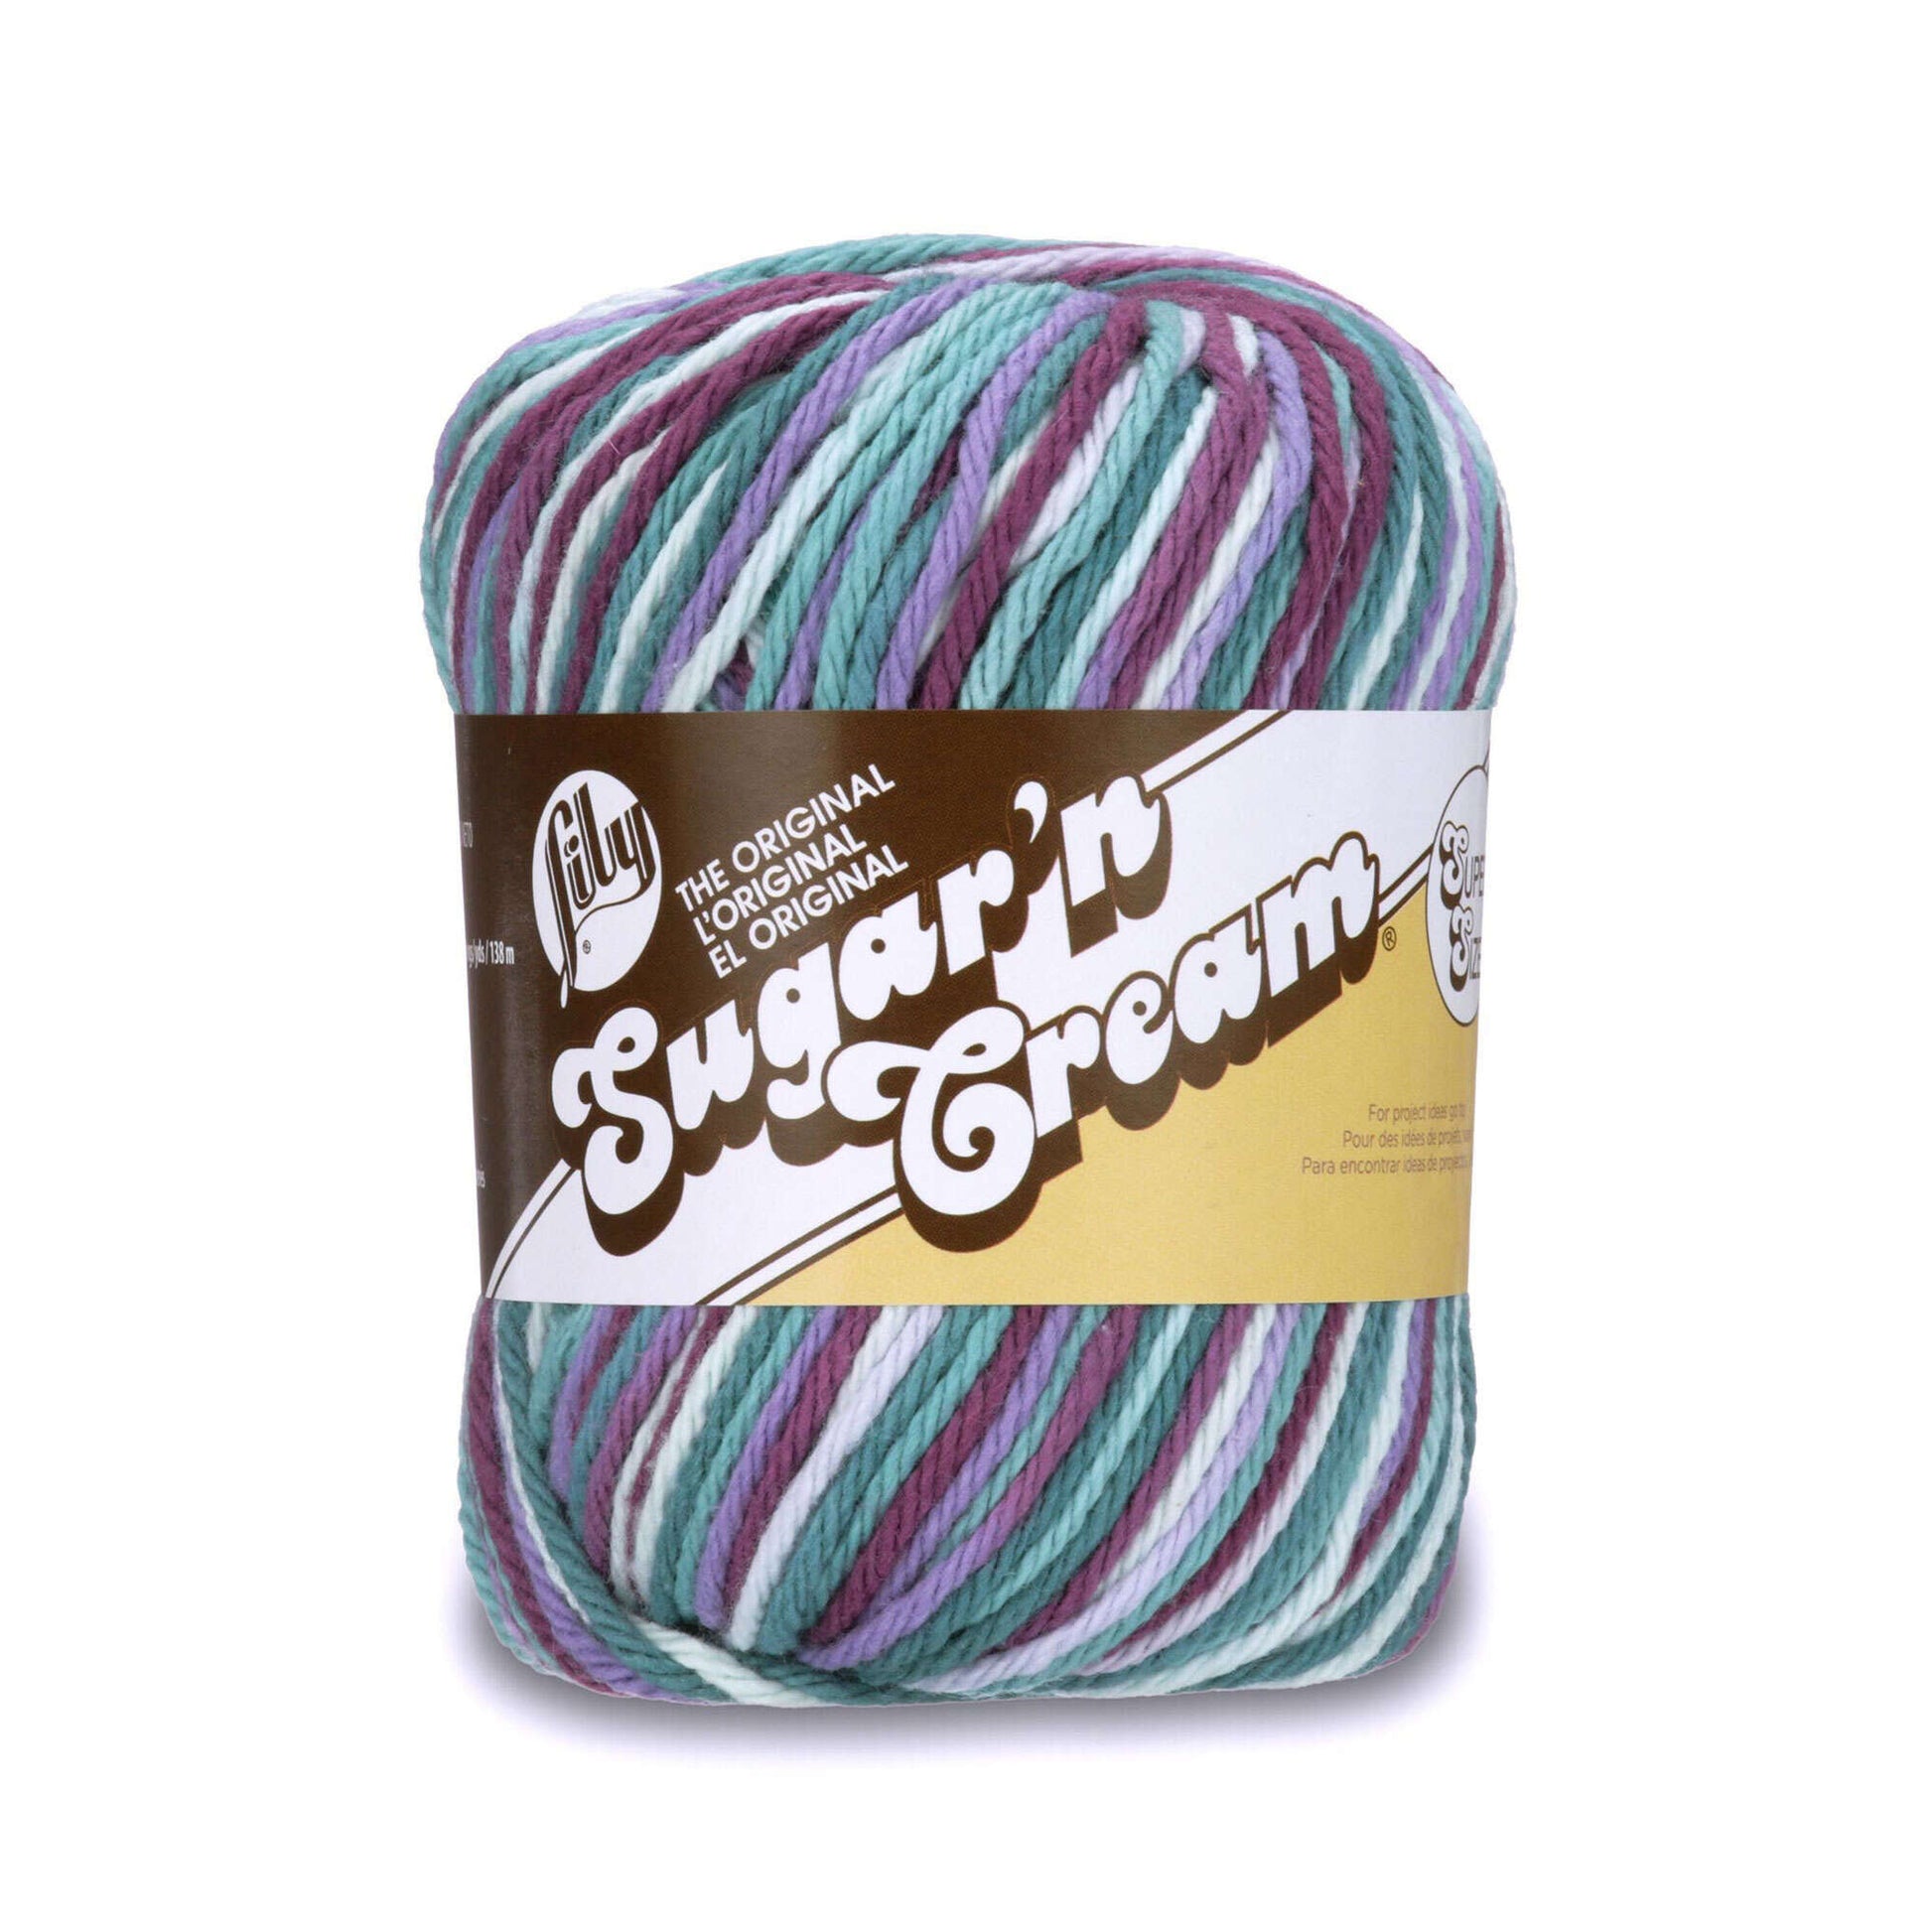 Lily Sugar'n Cream Super Size Ombres Yarn Crown Jewels Ombre